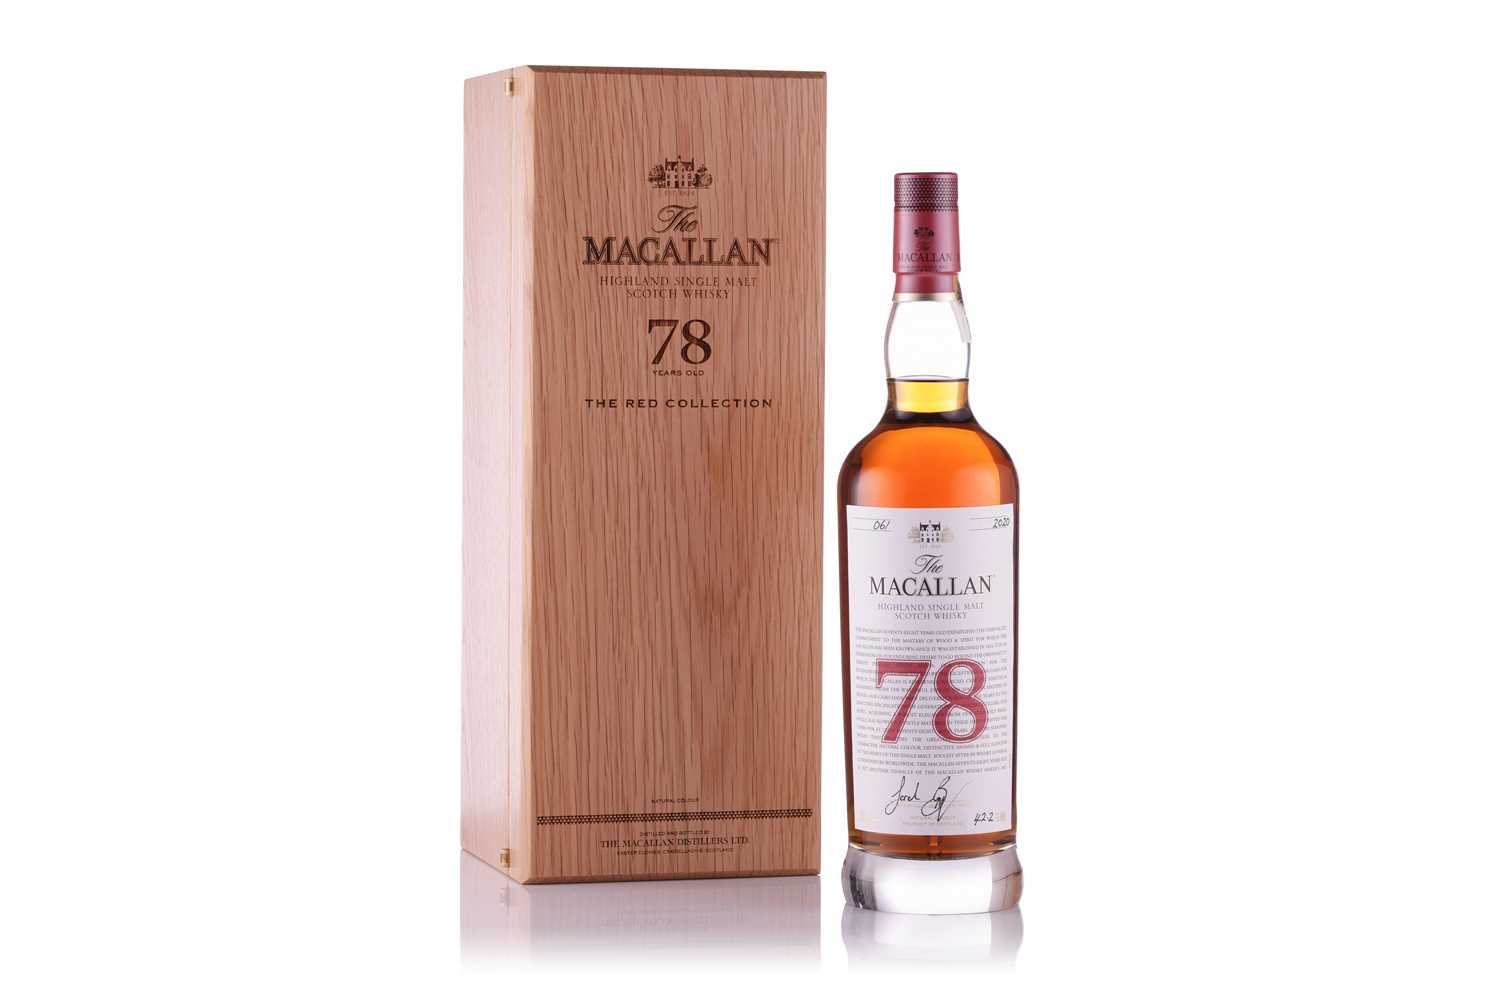 The Macallan 78 year old, The Red Collection. Distilled and bottled by The Macallan Distillery Ltd